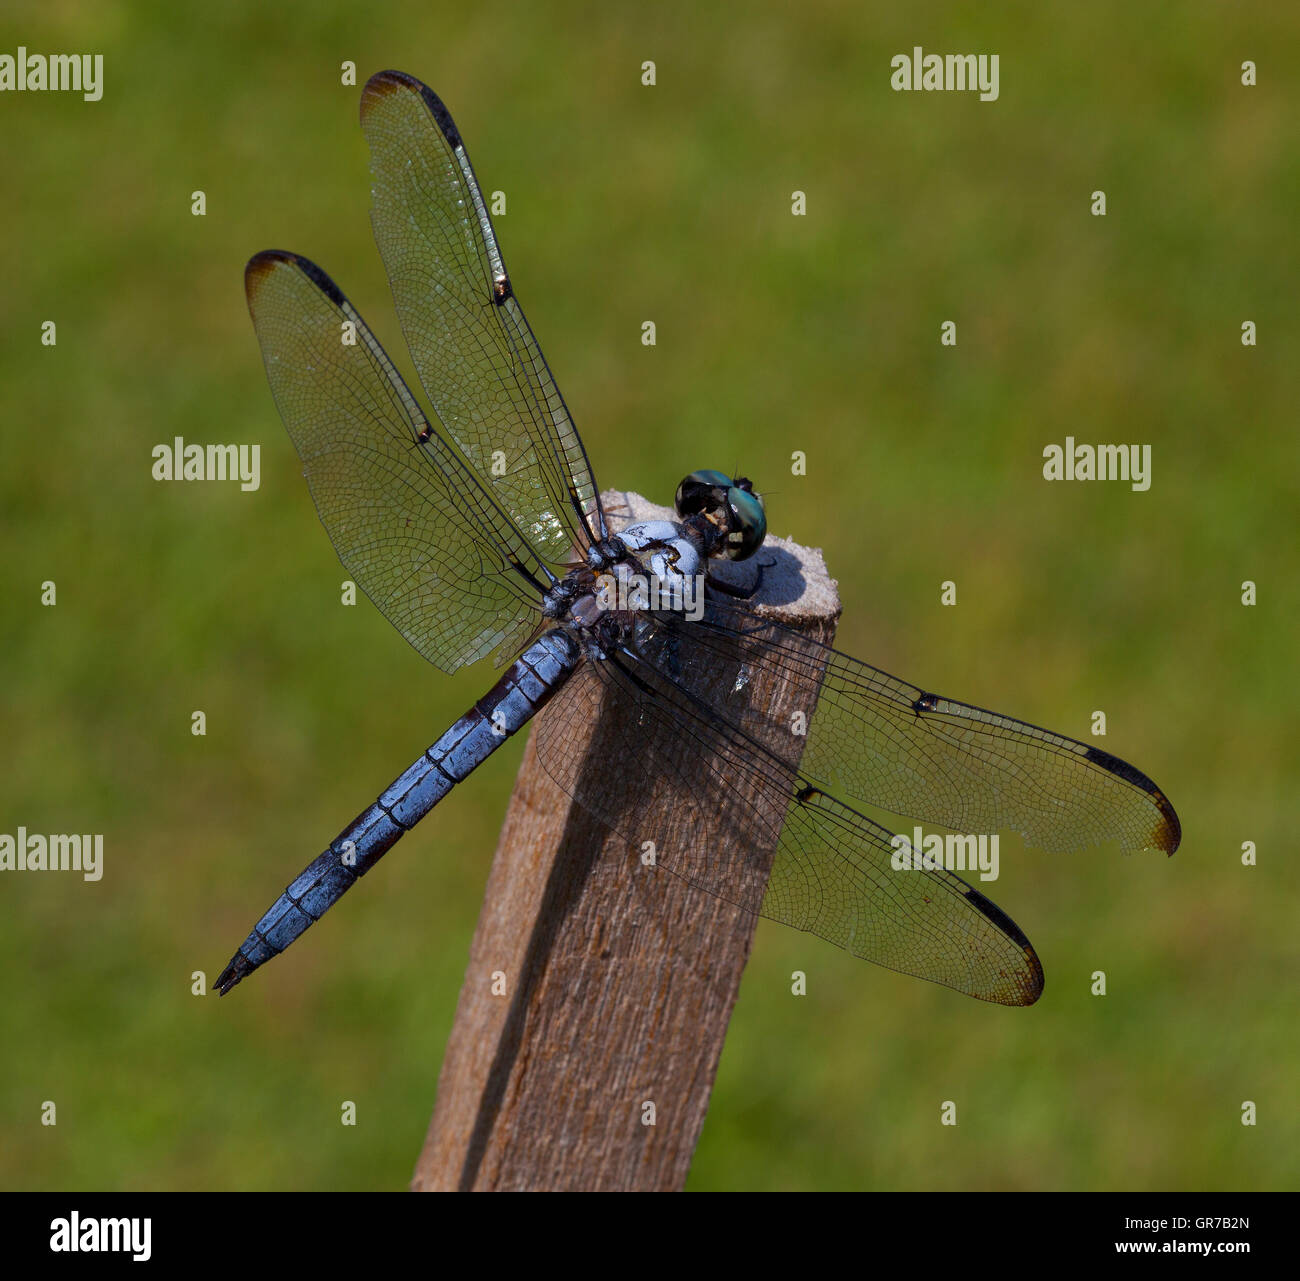 Blue headed dragonfly that is sitting on a stick Stock Photo